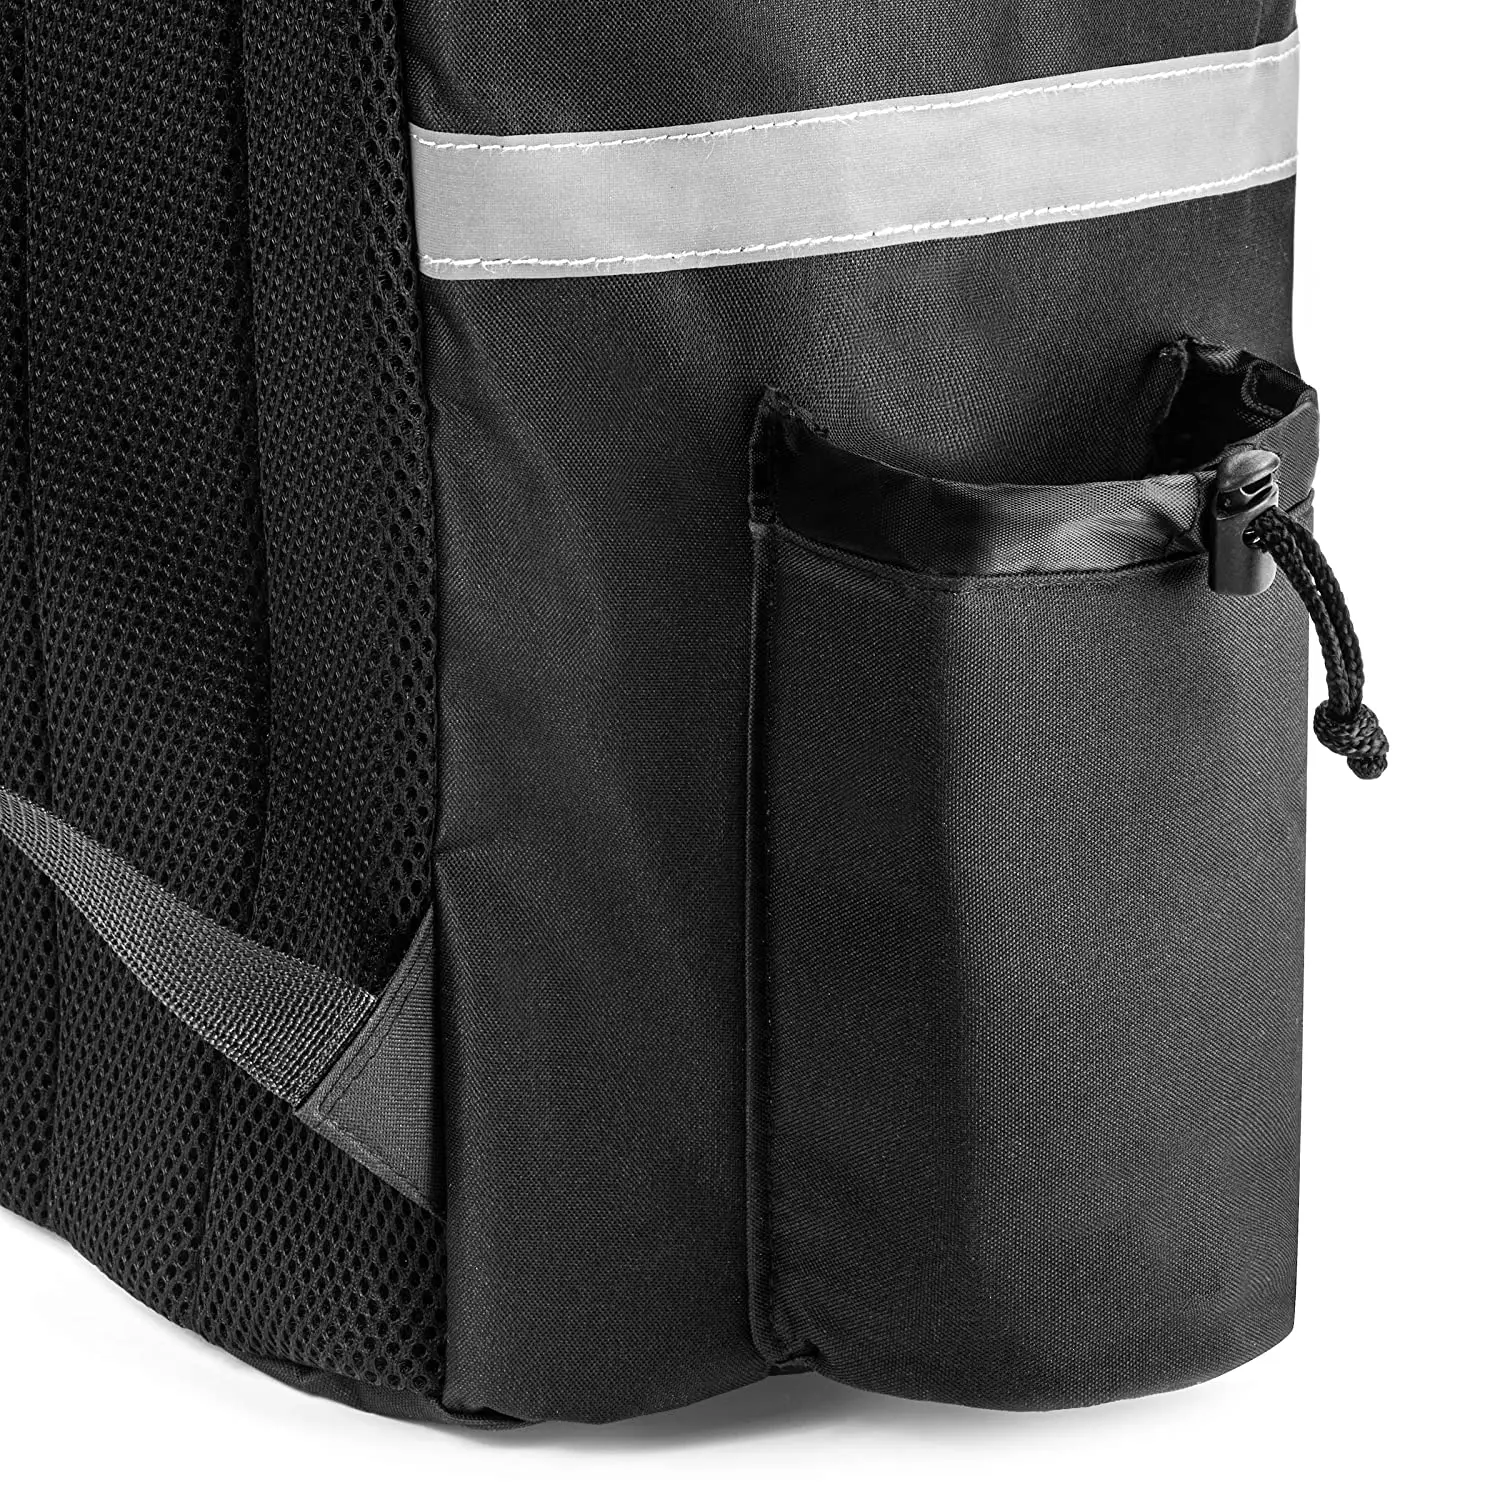 Thermal Insulated Food Delivery Backpack Pocket and Receipt Window Cooler Bag Backpack